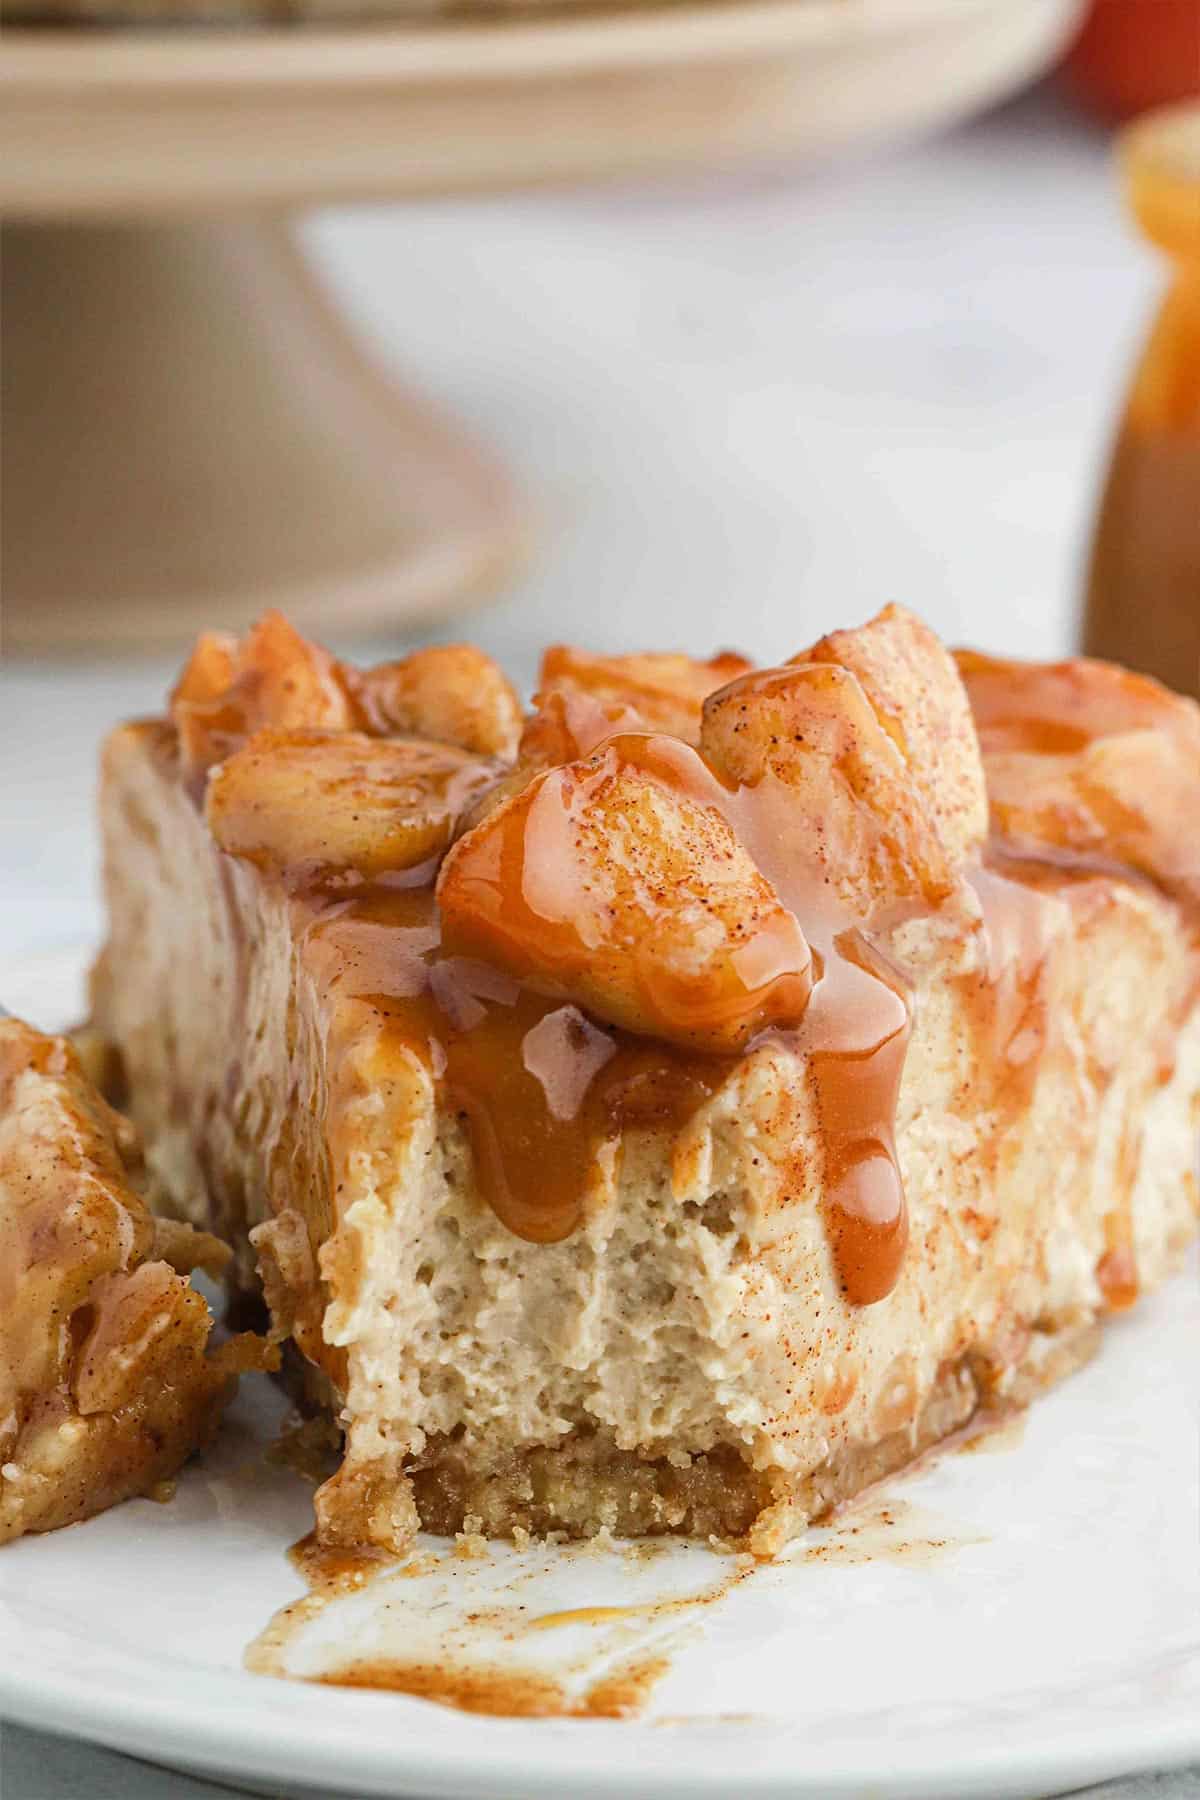 A decadent apple cheesecake with slice taken out on white plate with caramel sauce poured over it form the front.